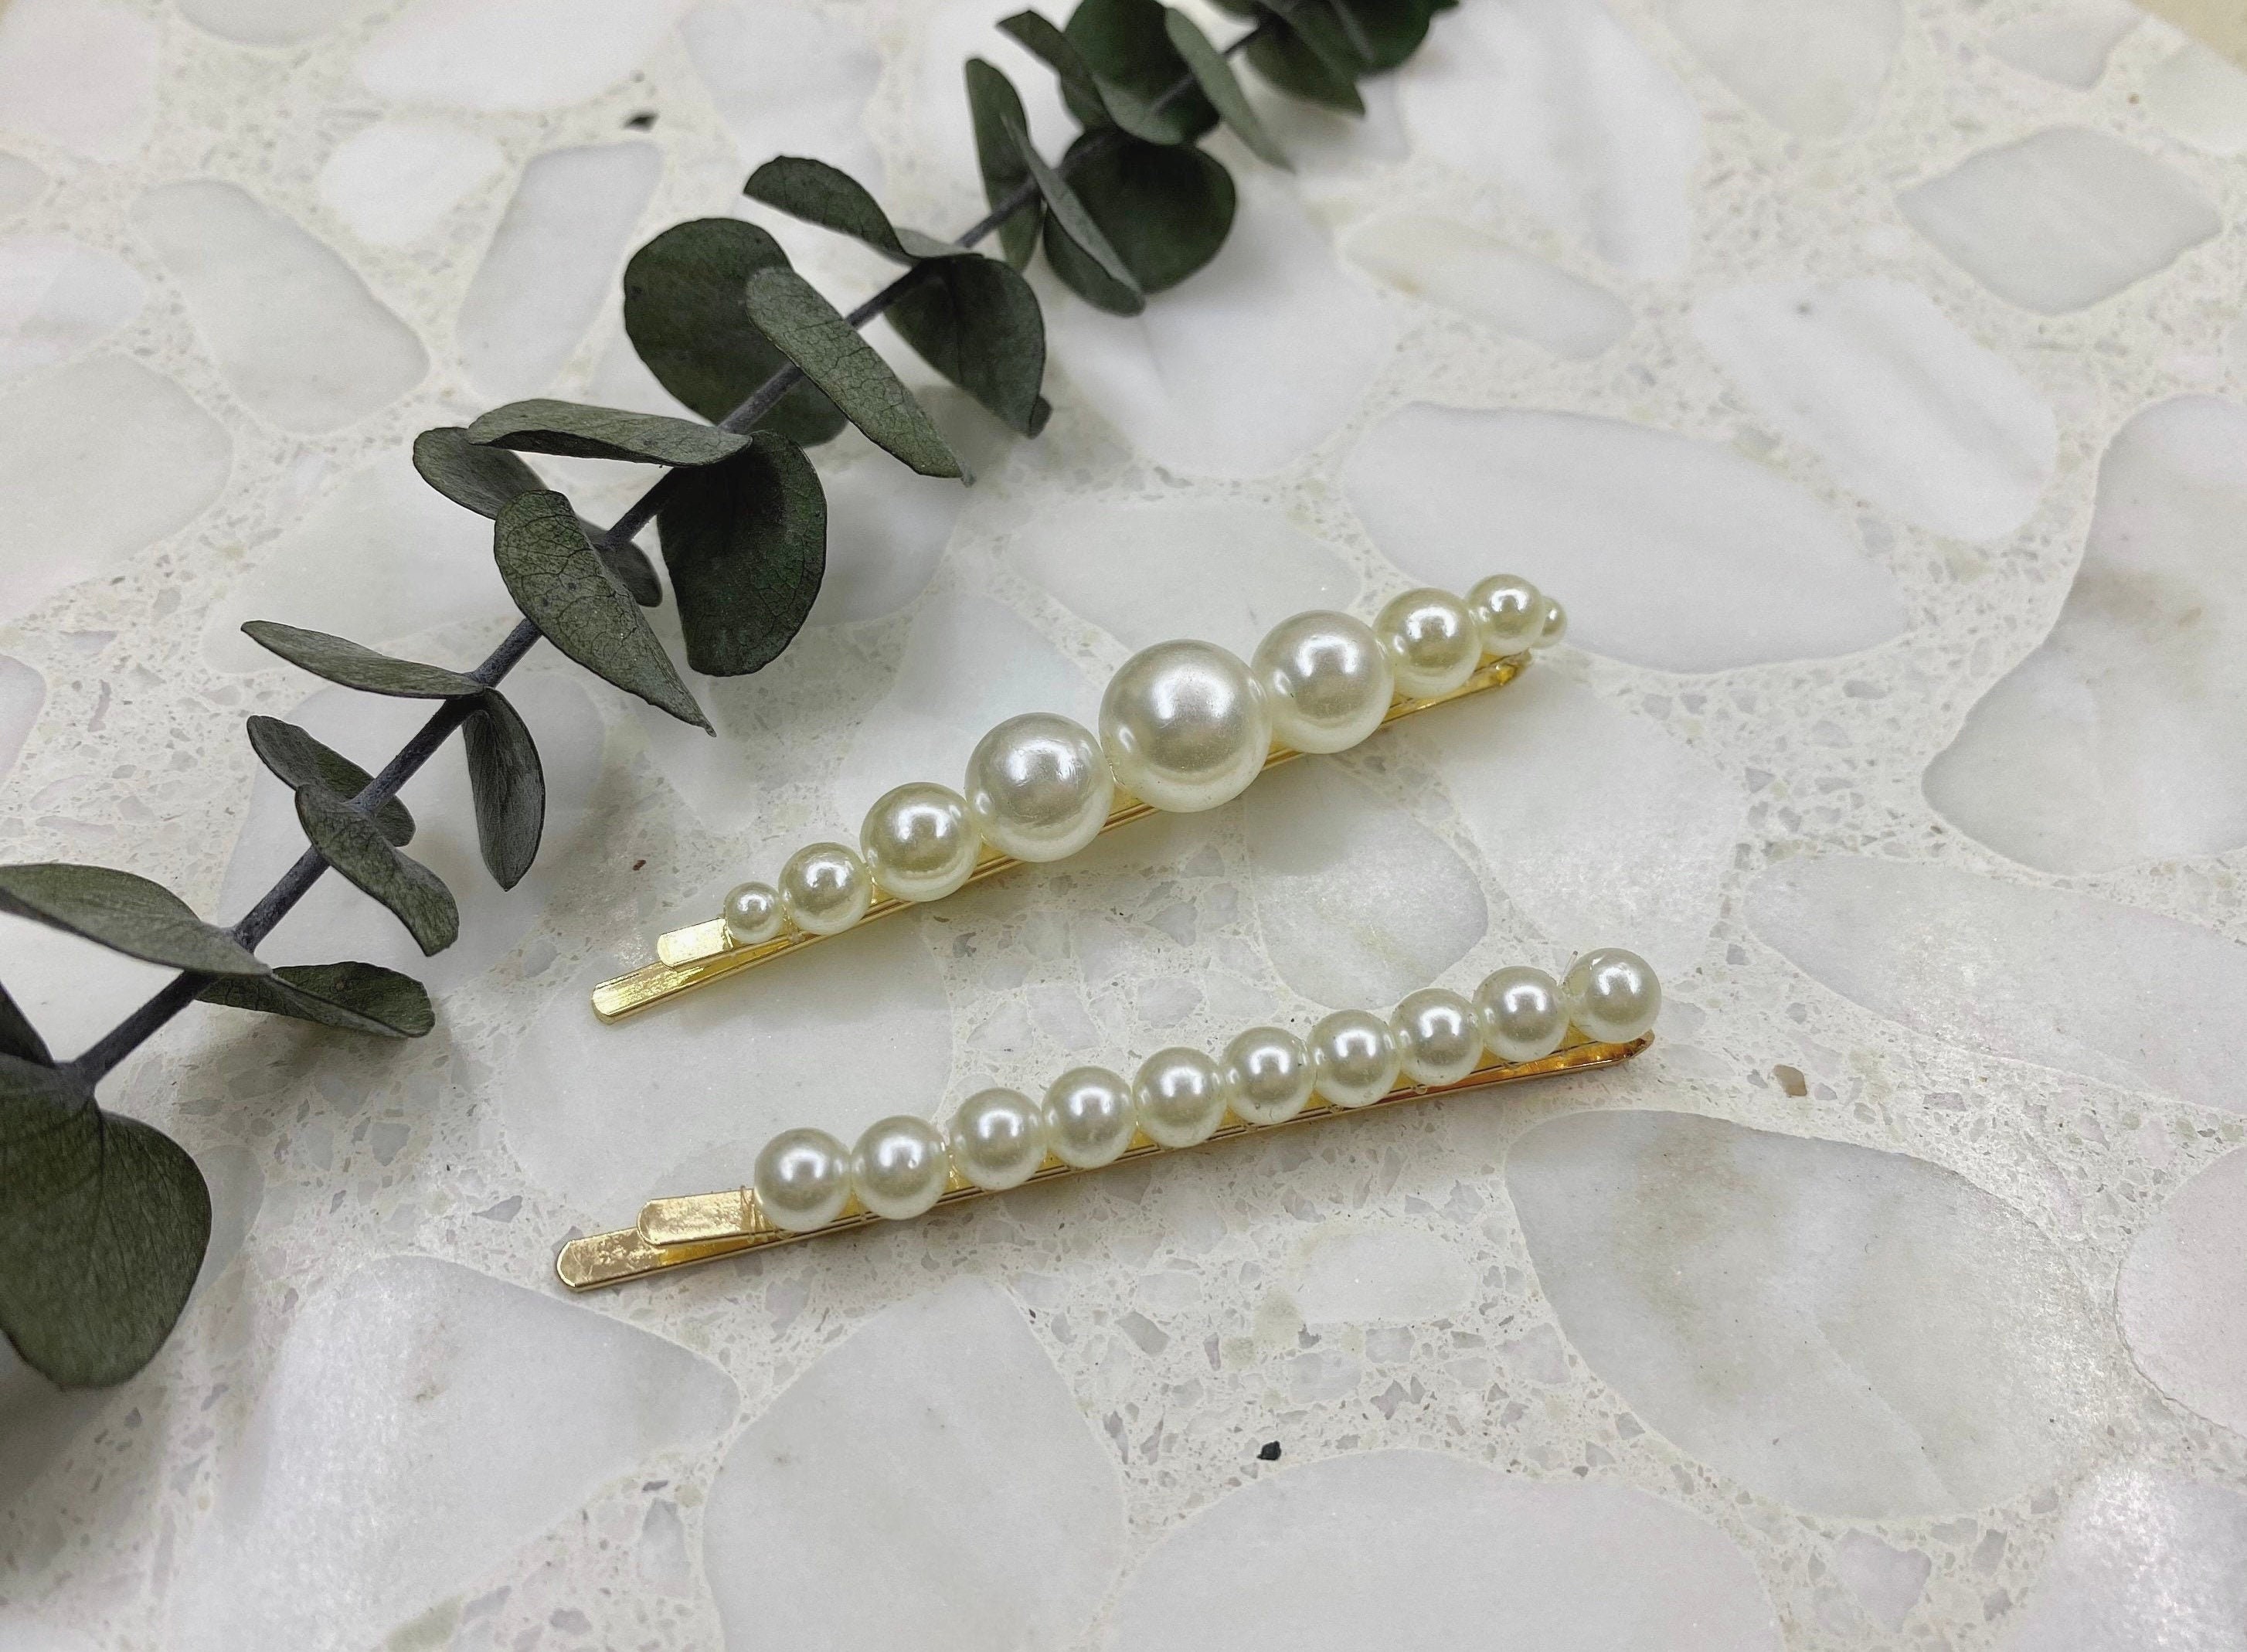 2Pcs Pearl Hair Clips Fashion Handmade Pearl Hair Barrettes Elegant Pearl  Hair Clips - Handmade Gold Snap Barrettes - Ideal for Thick Hair & Styling  